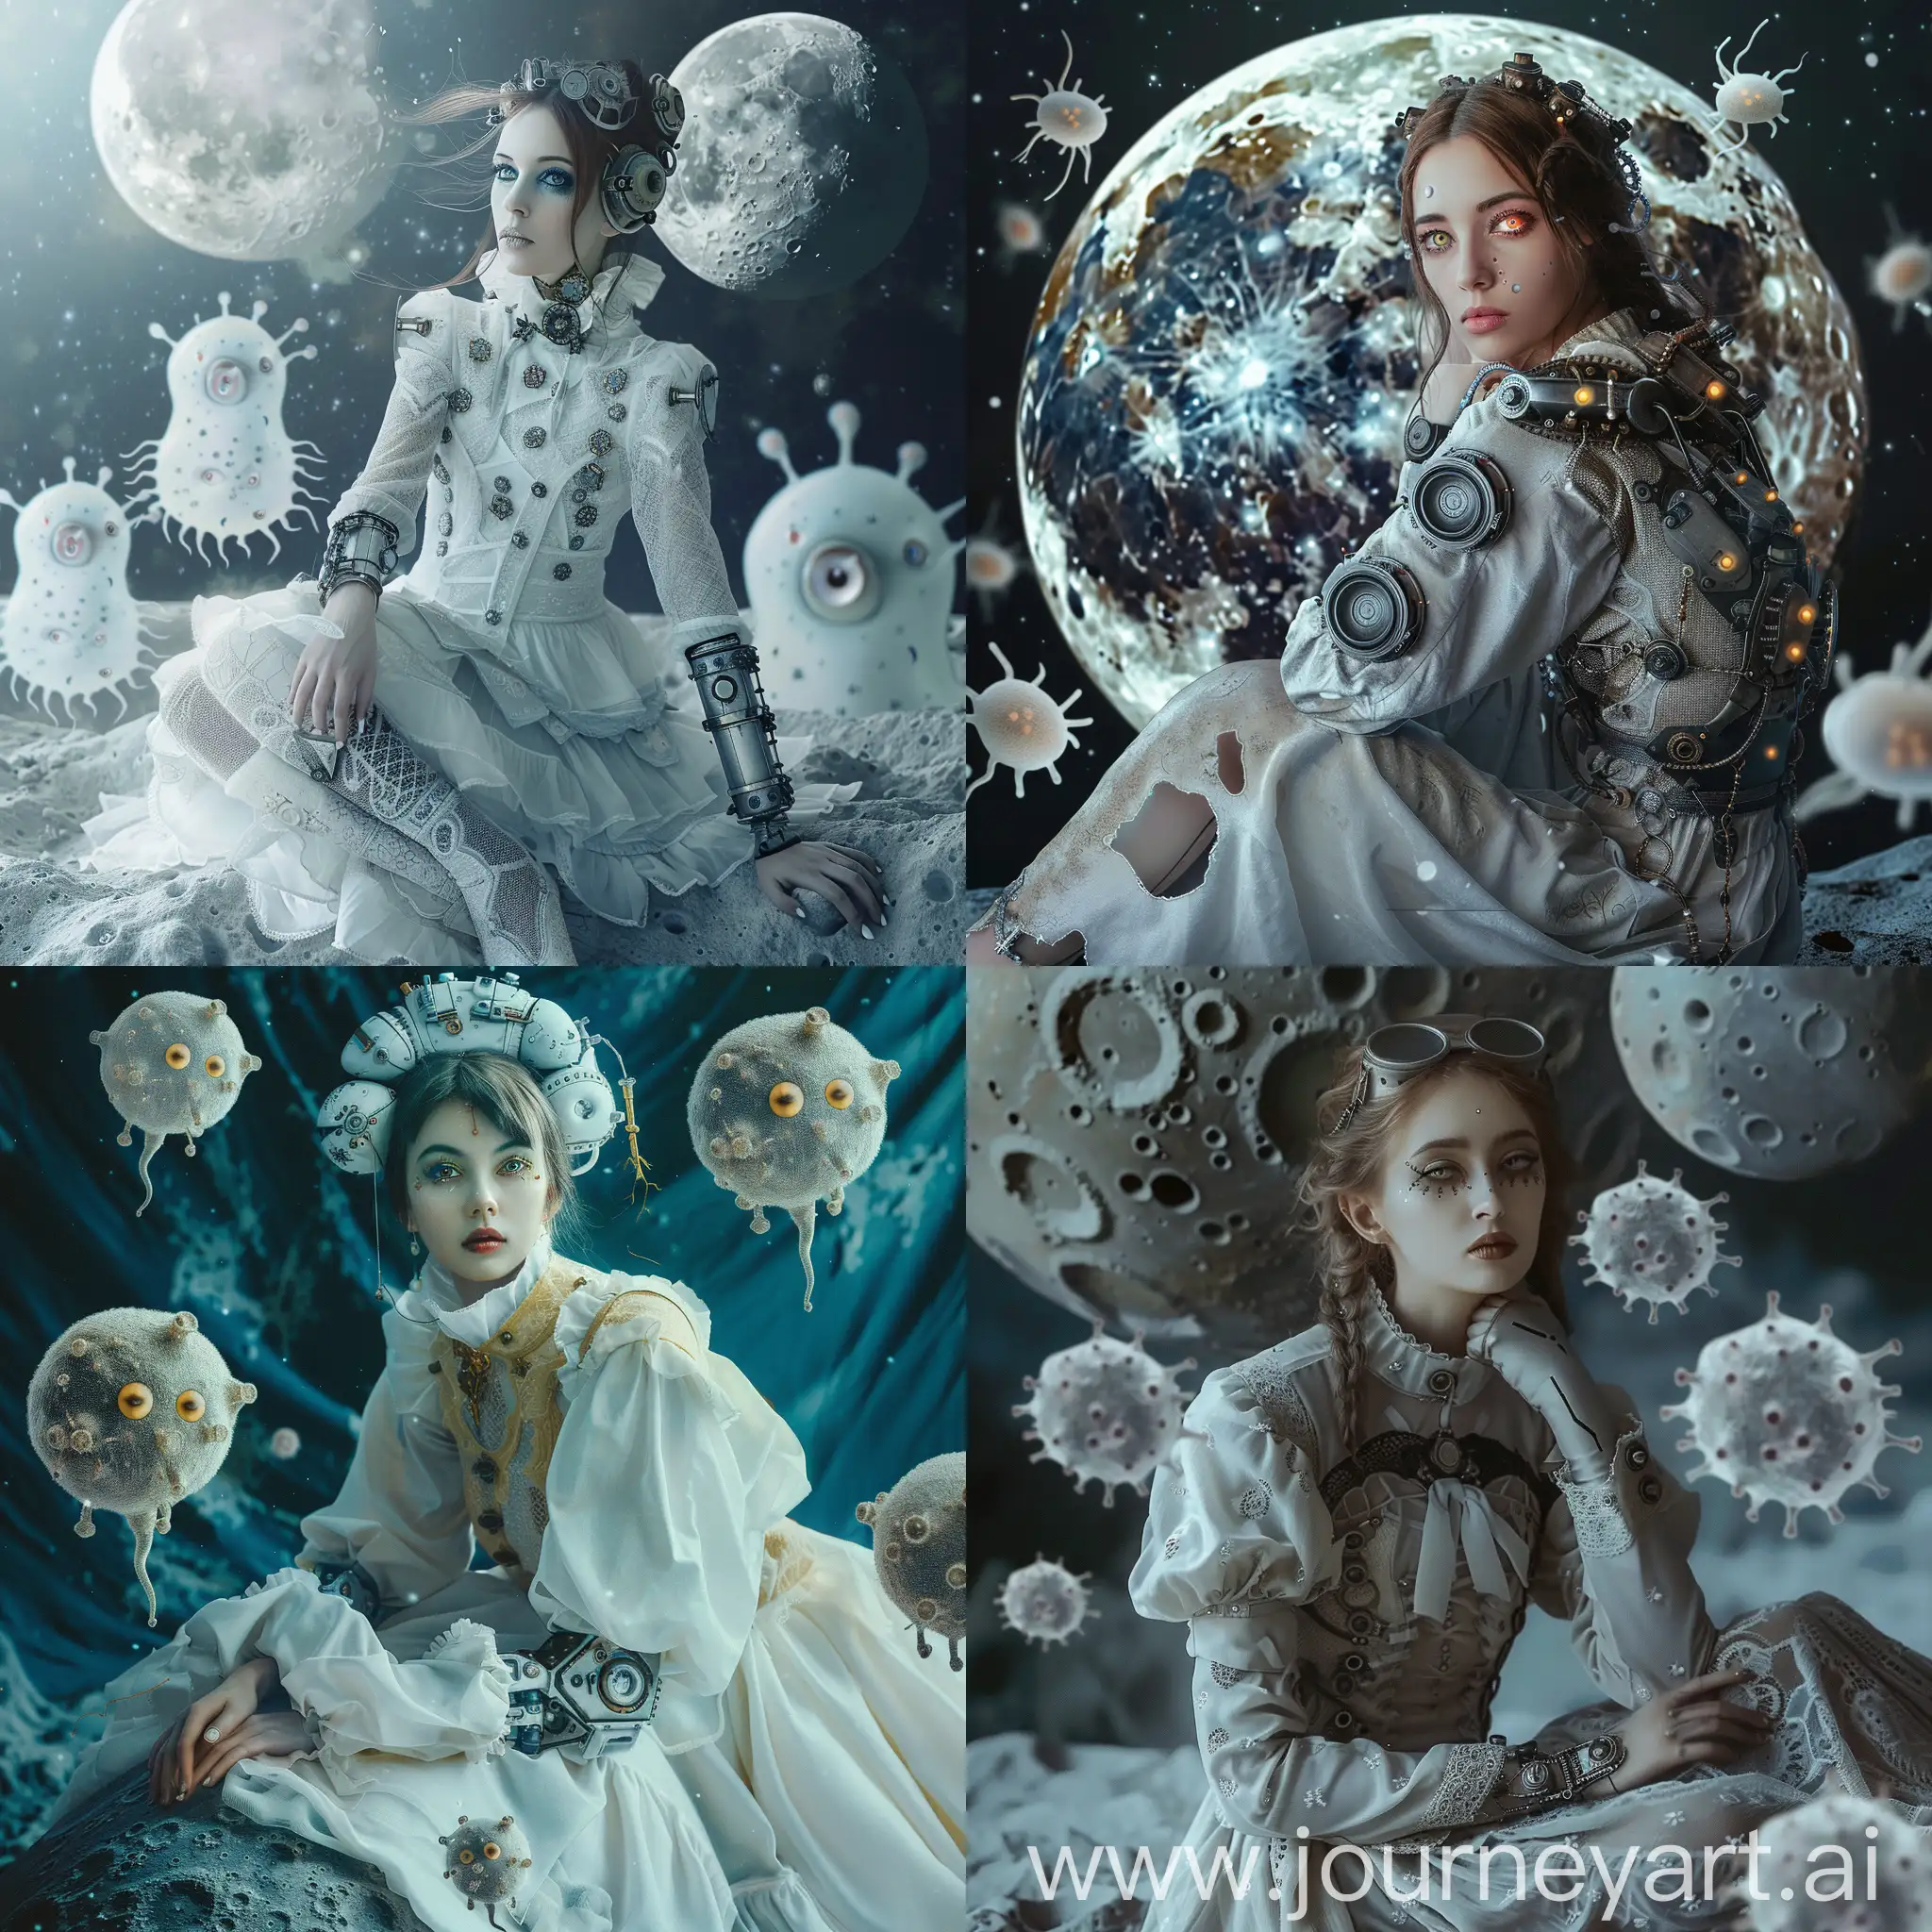 Steampunk-Cyborg-Woman-Sitting-on-Moon-with-Cute-Bacteria-Ghosts